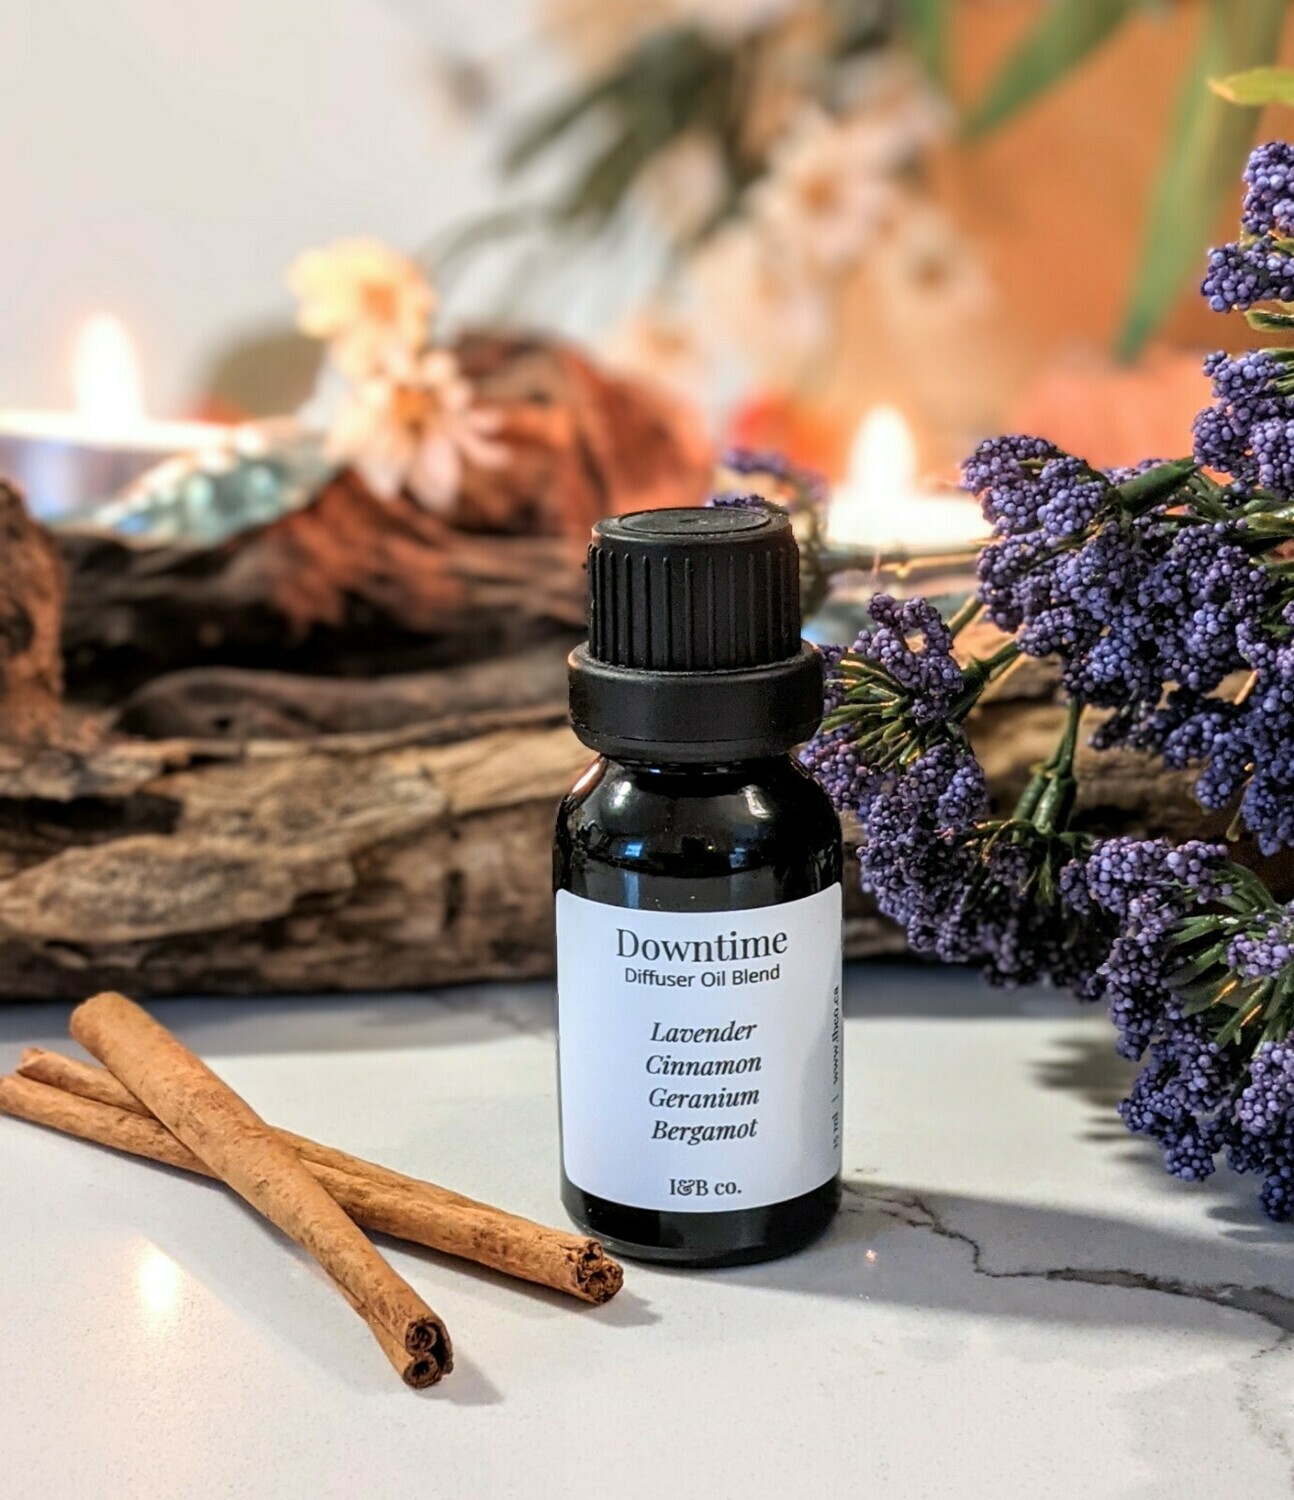 Downtime Diffuser Oil Blend